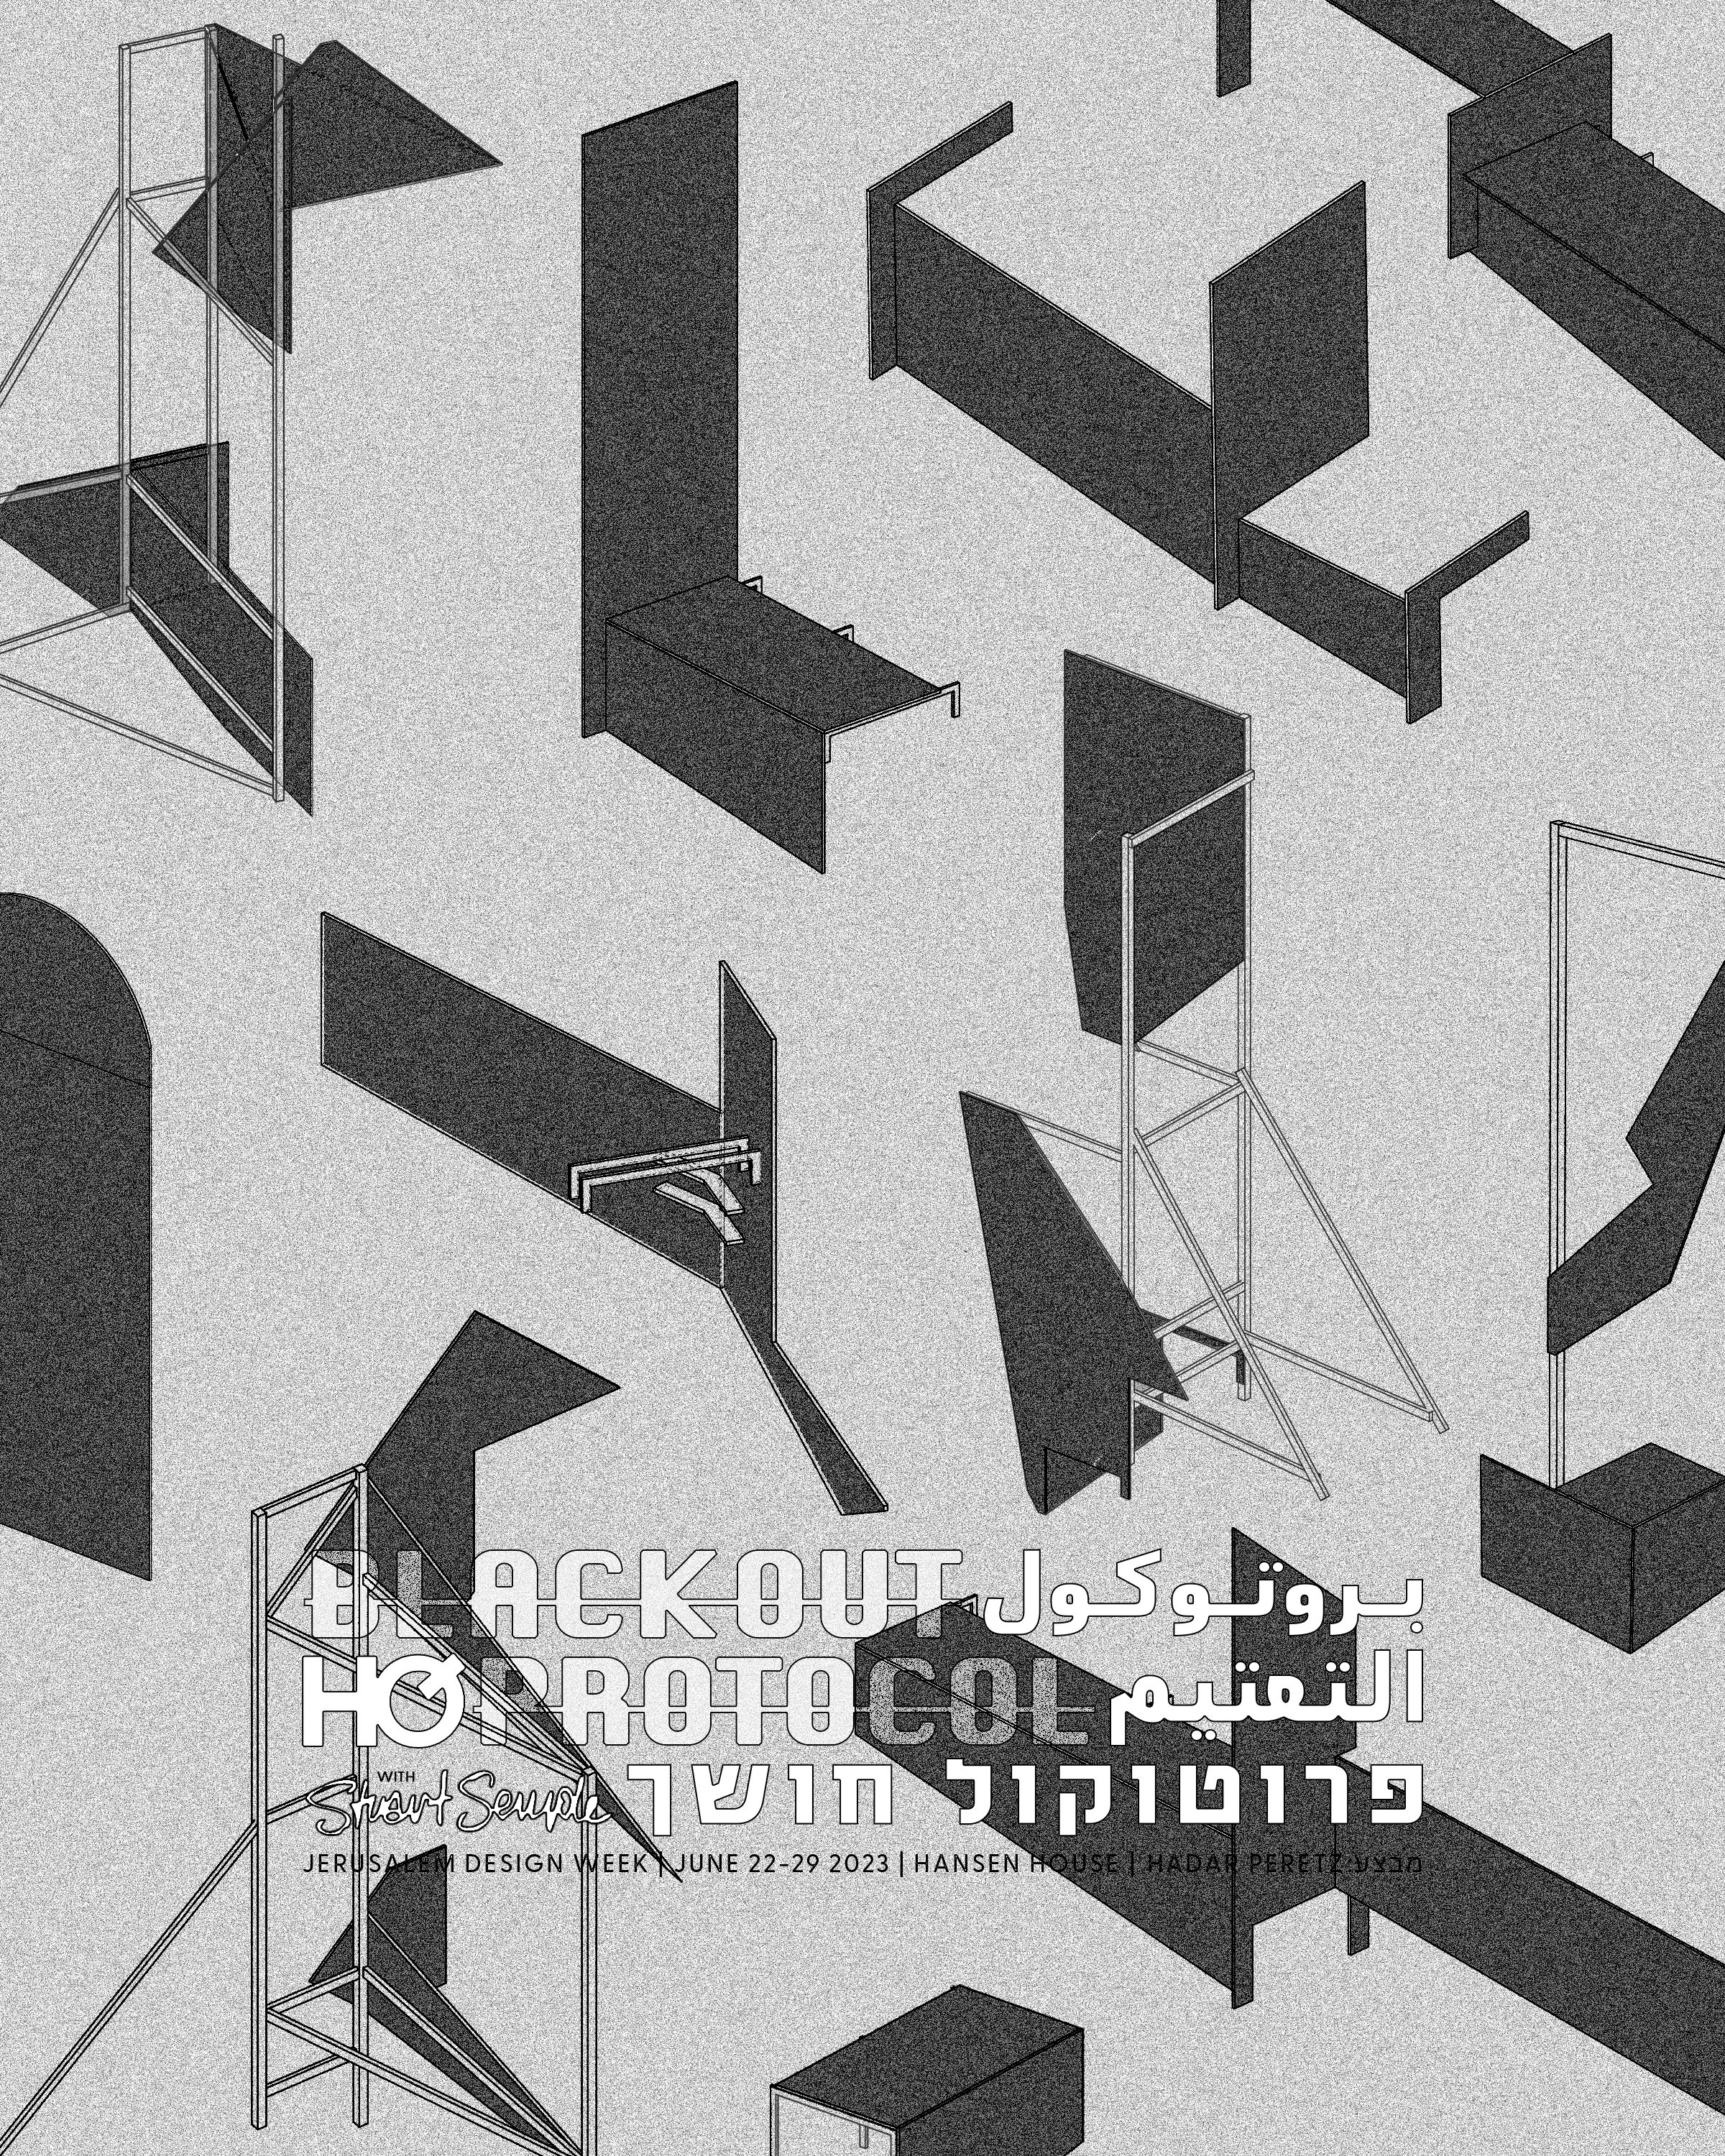 Blackout Protocol_HQ Architects_JDW_Black fragments with text_credit HQ Architects.jpg